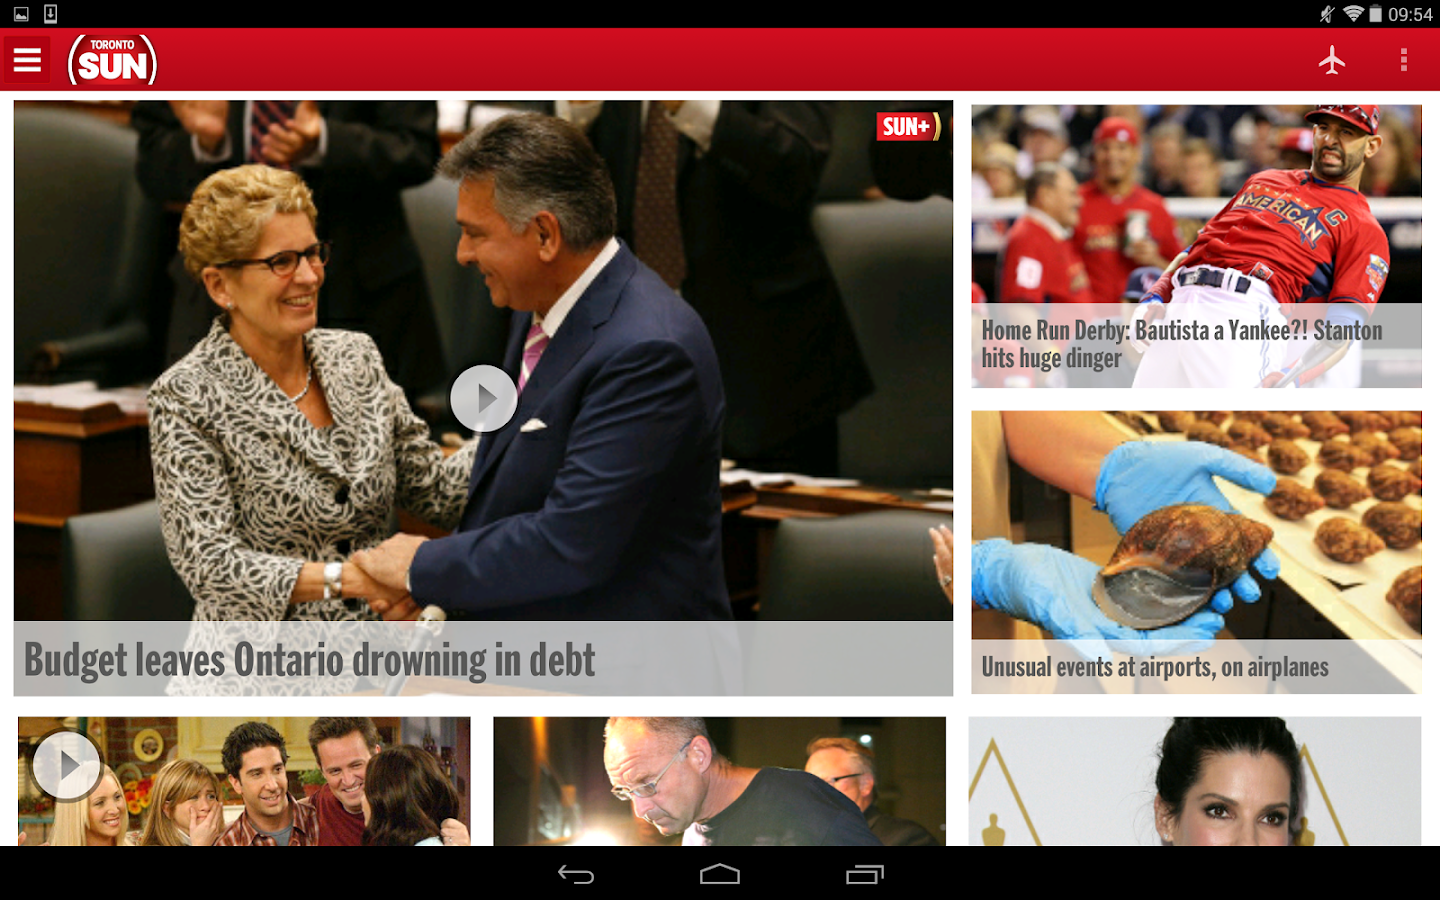 Does the Toronto Sun have a crossword puzzle?